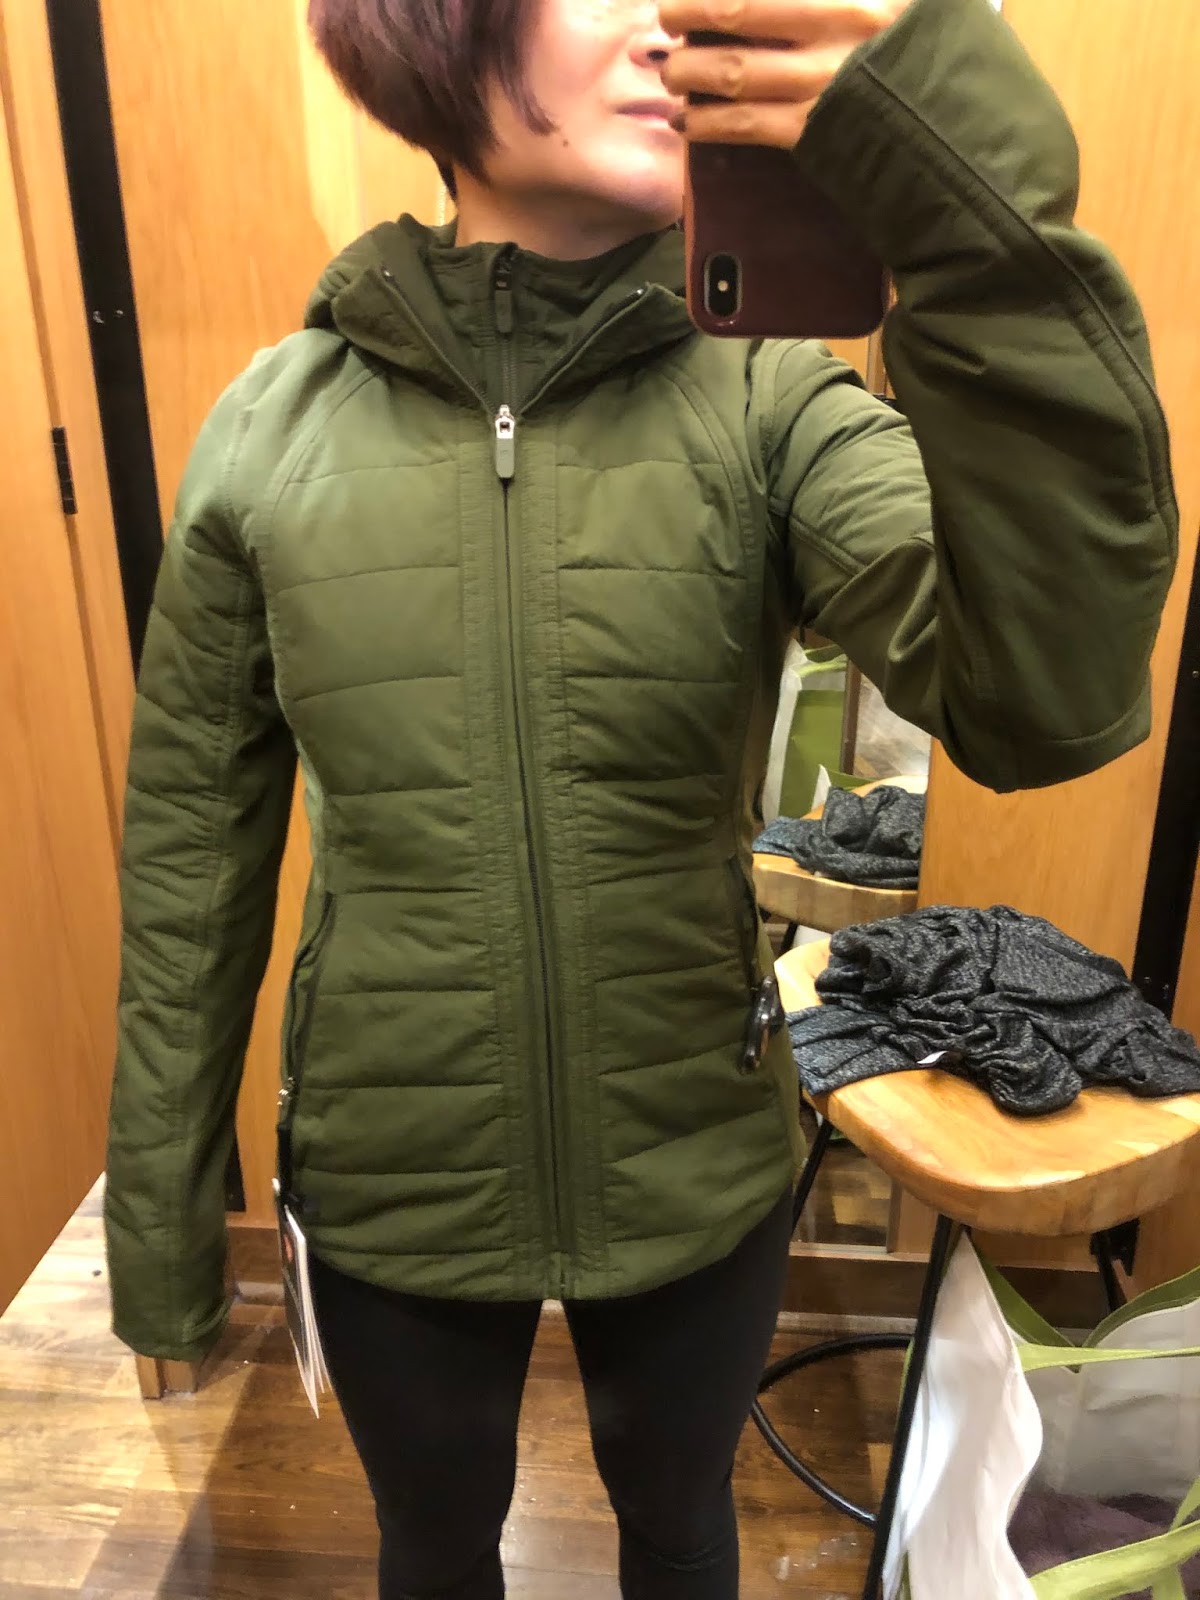 Fit Review Friday! Another Mile Jacket